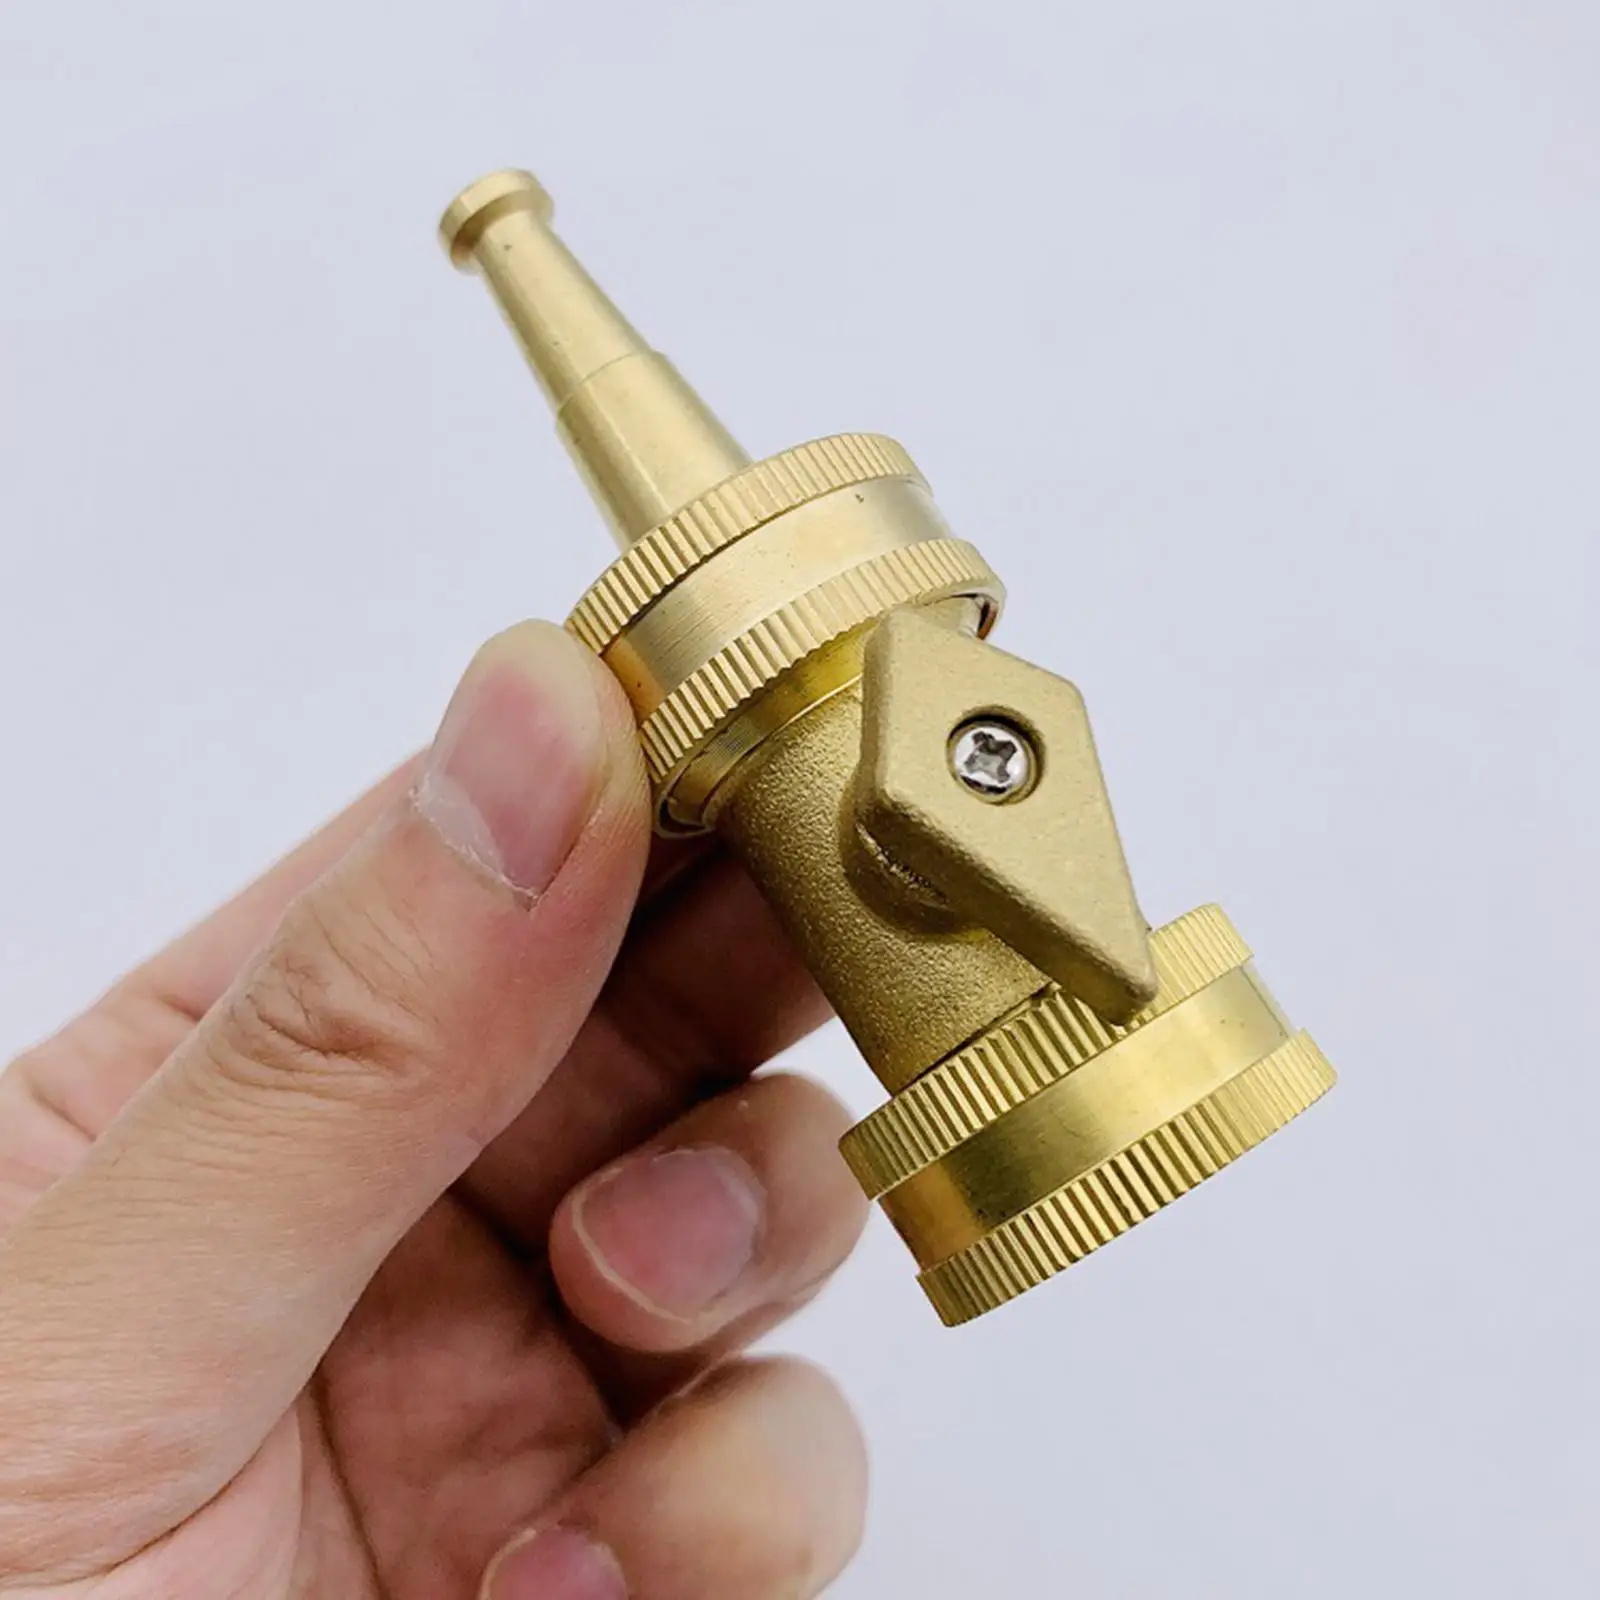 Twist Hose Nozzle with Hose Shut Off switch Brass Sweeper Nozzle Water Hose Sprayer Nozzle for Driveway Washing Car Outdoor Deck